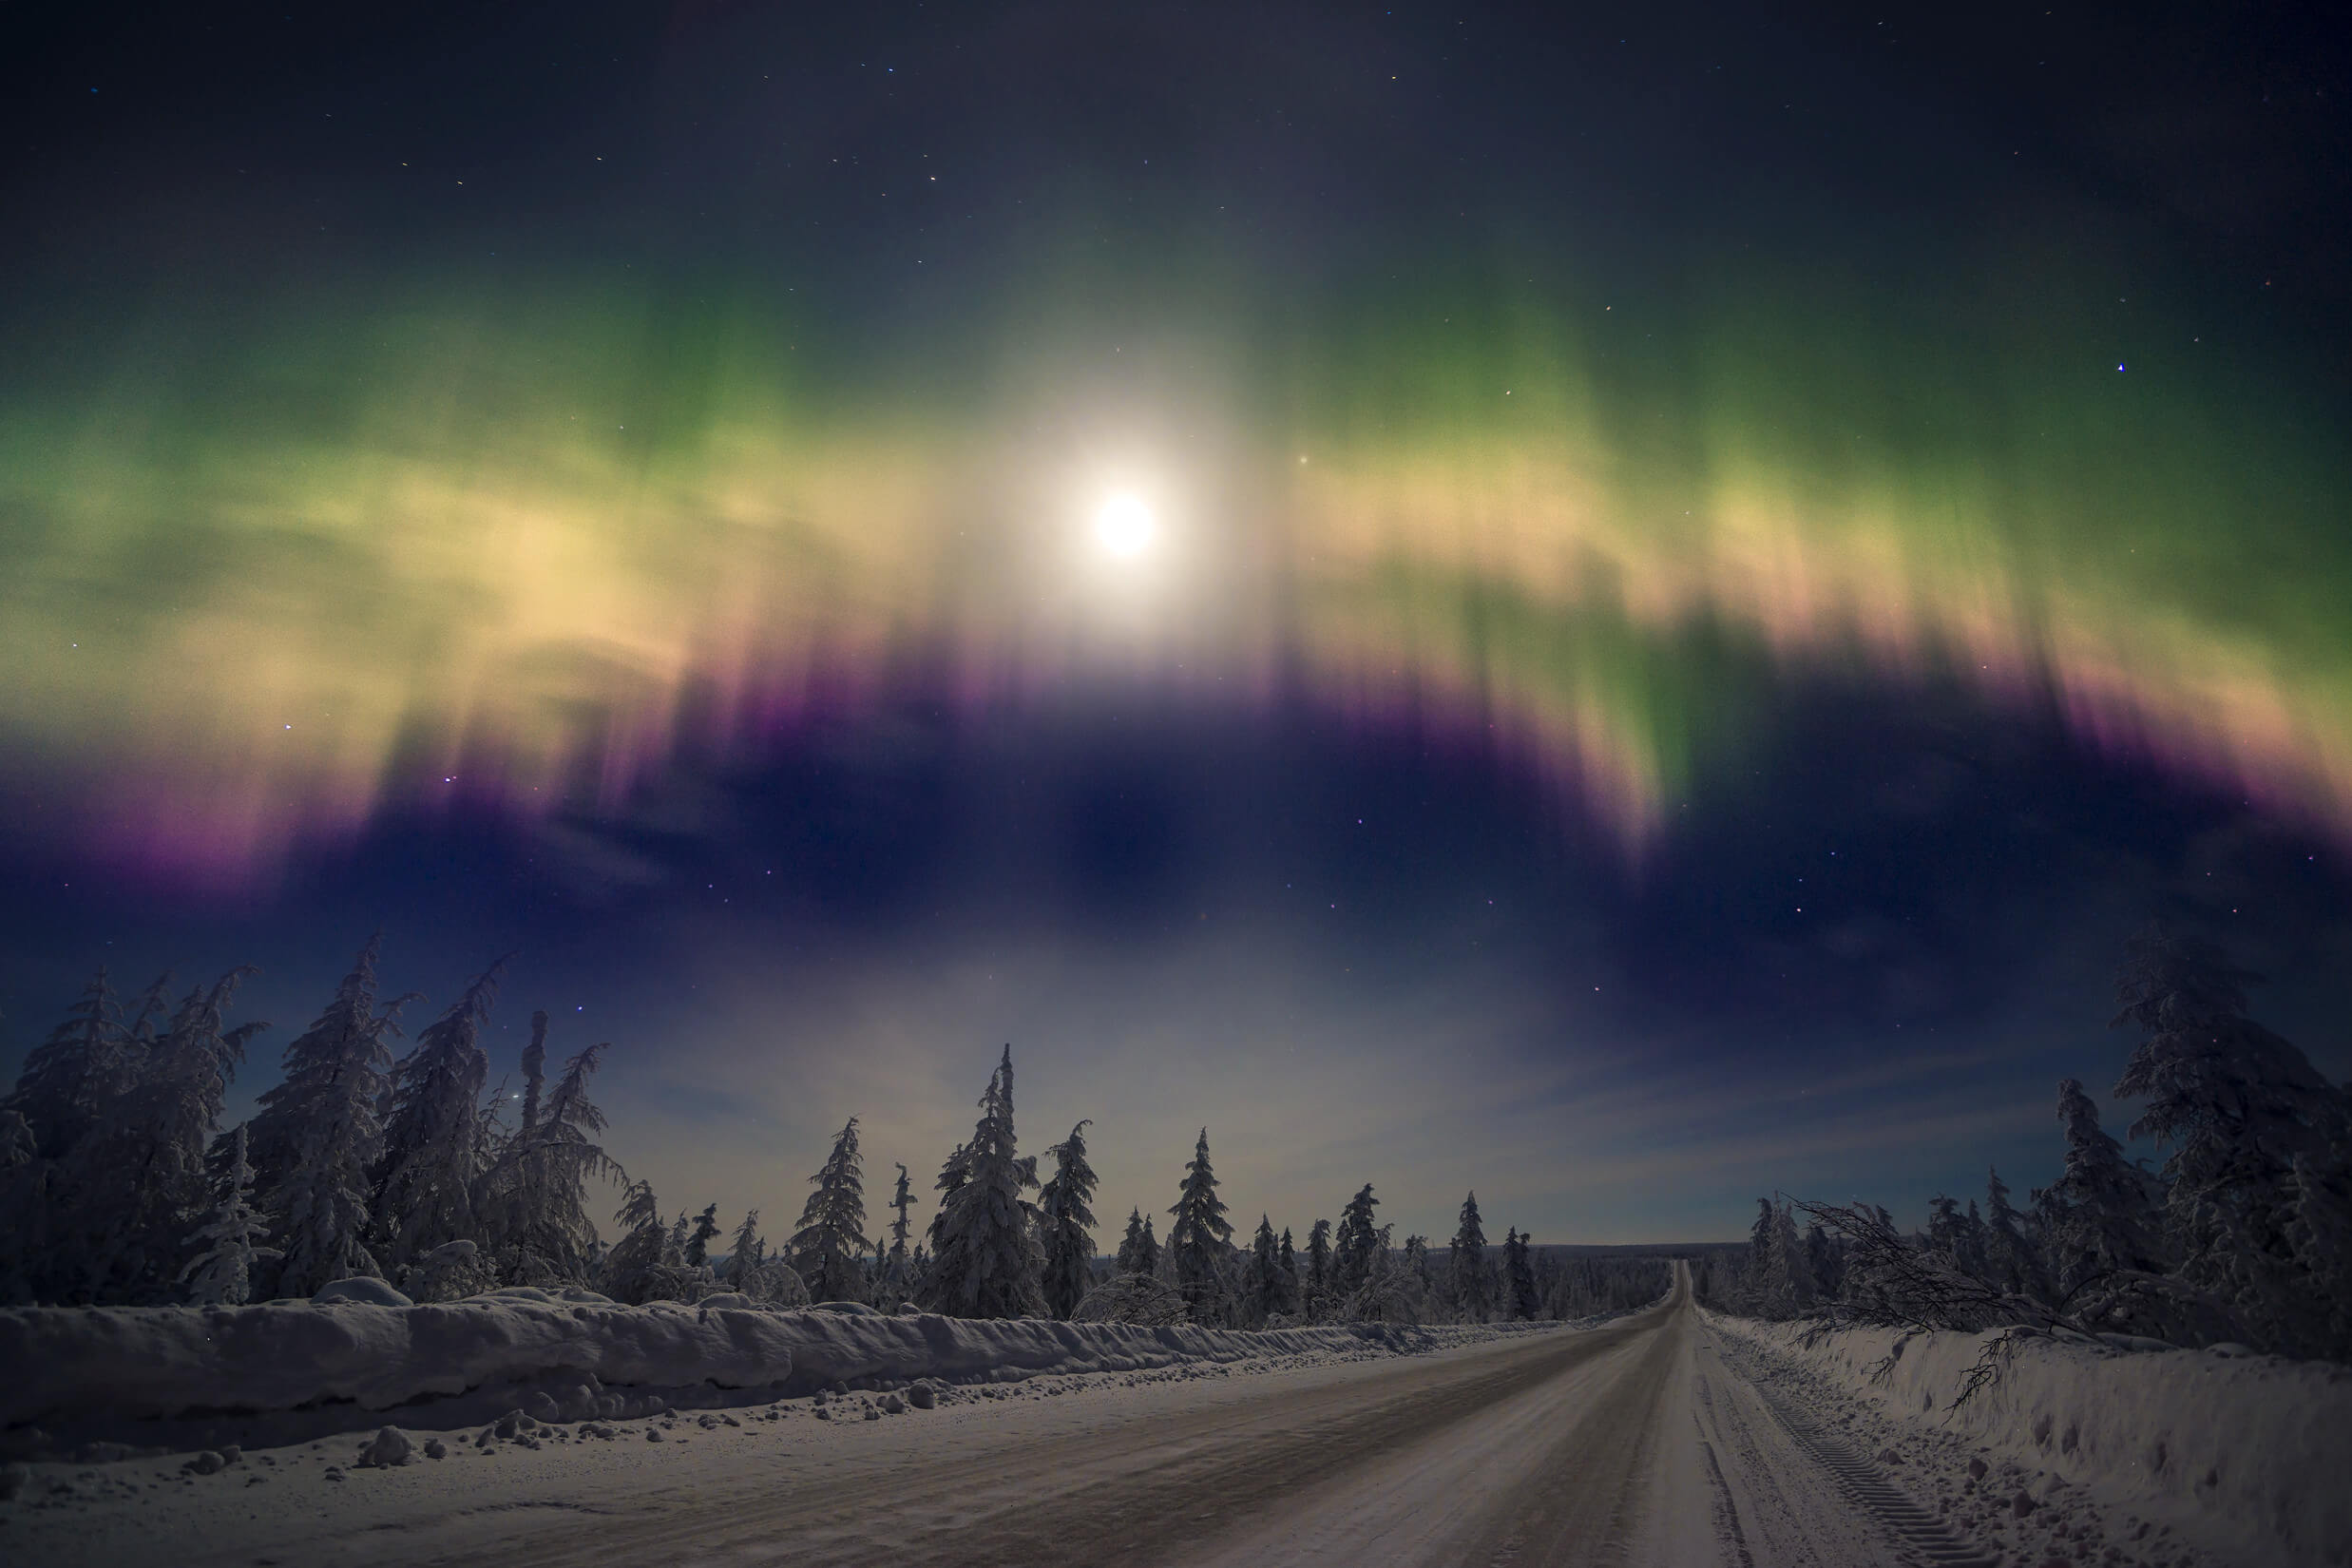 Does A Full Moon Lower Your Chances Of Seeing The Northern Lights